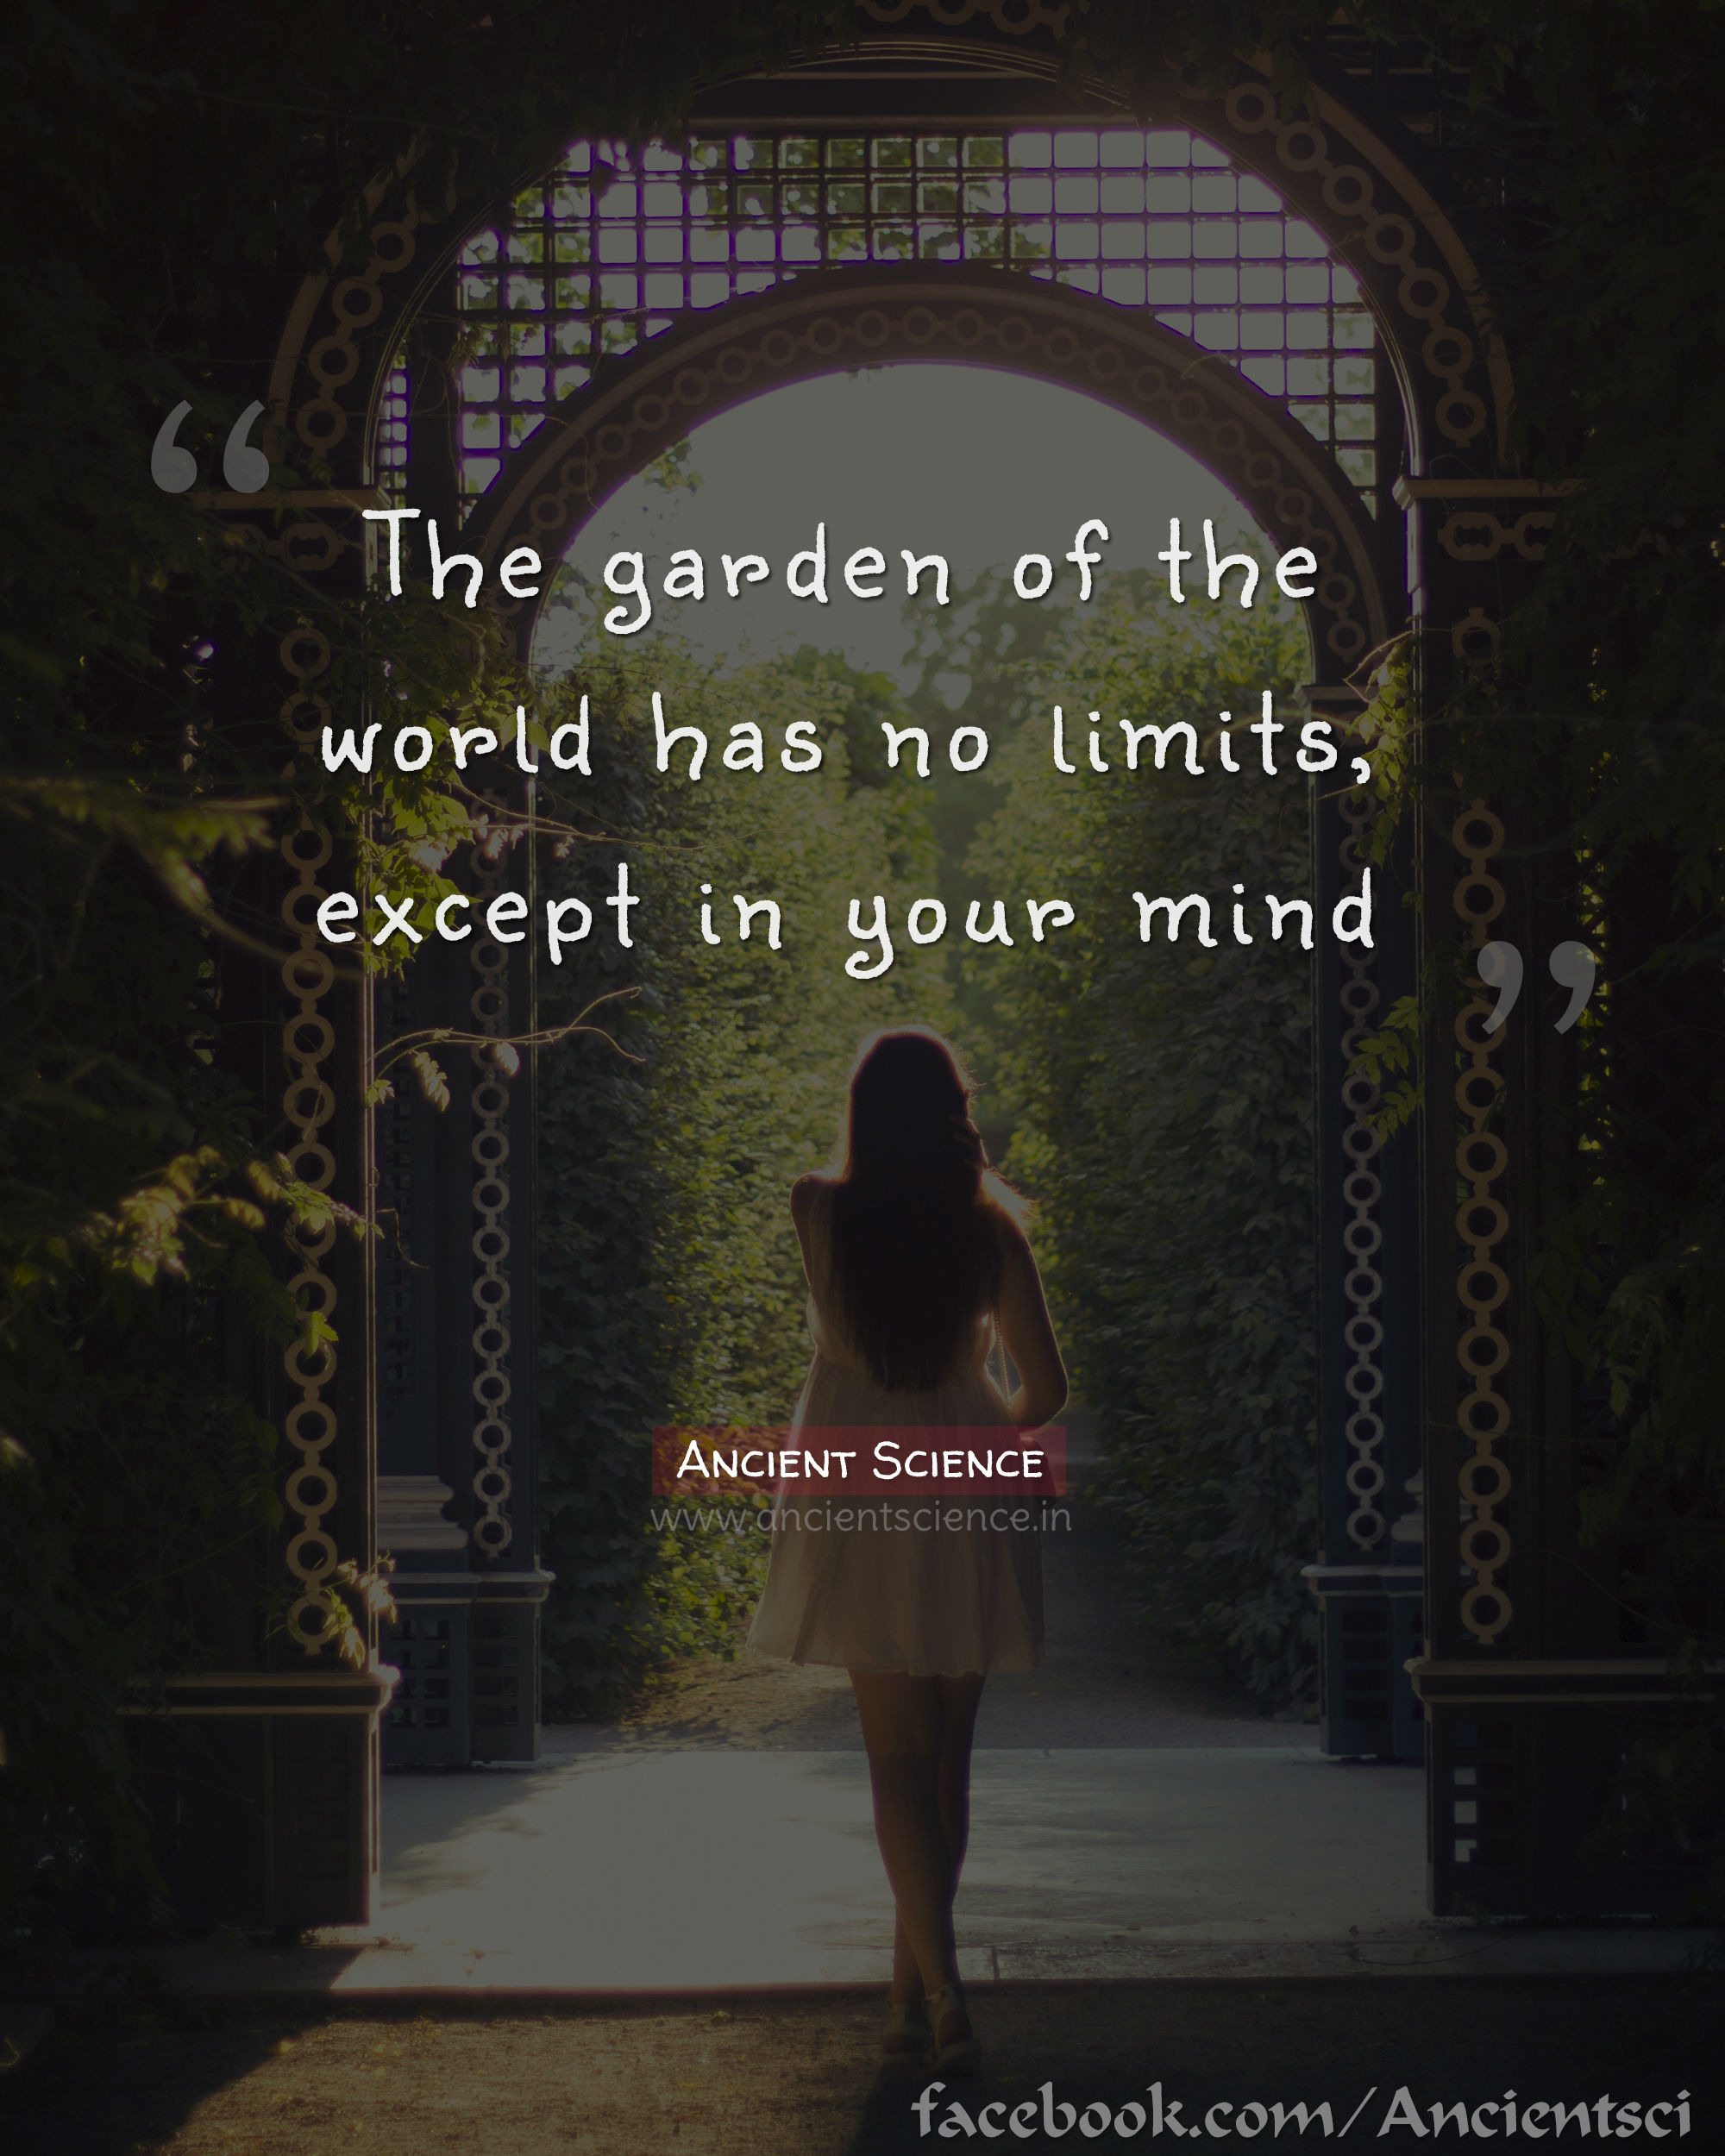 The garden of the world has no limits, except in your mind.